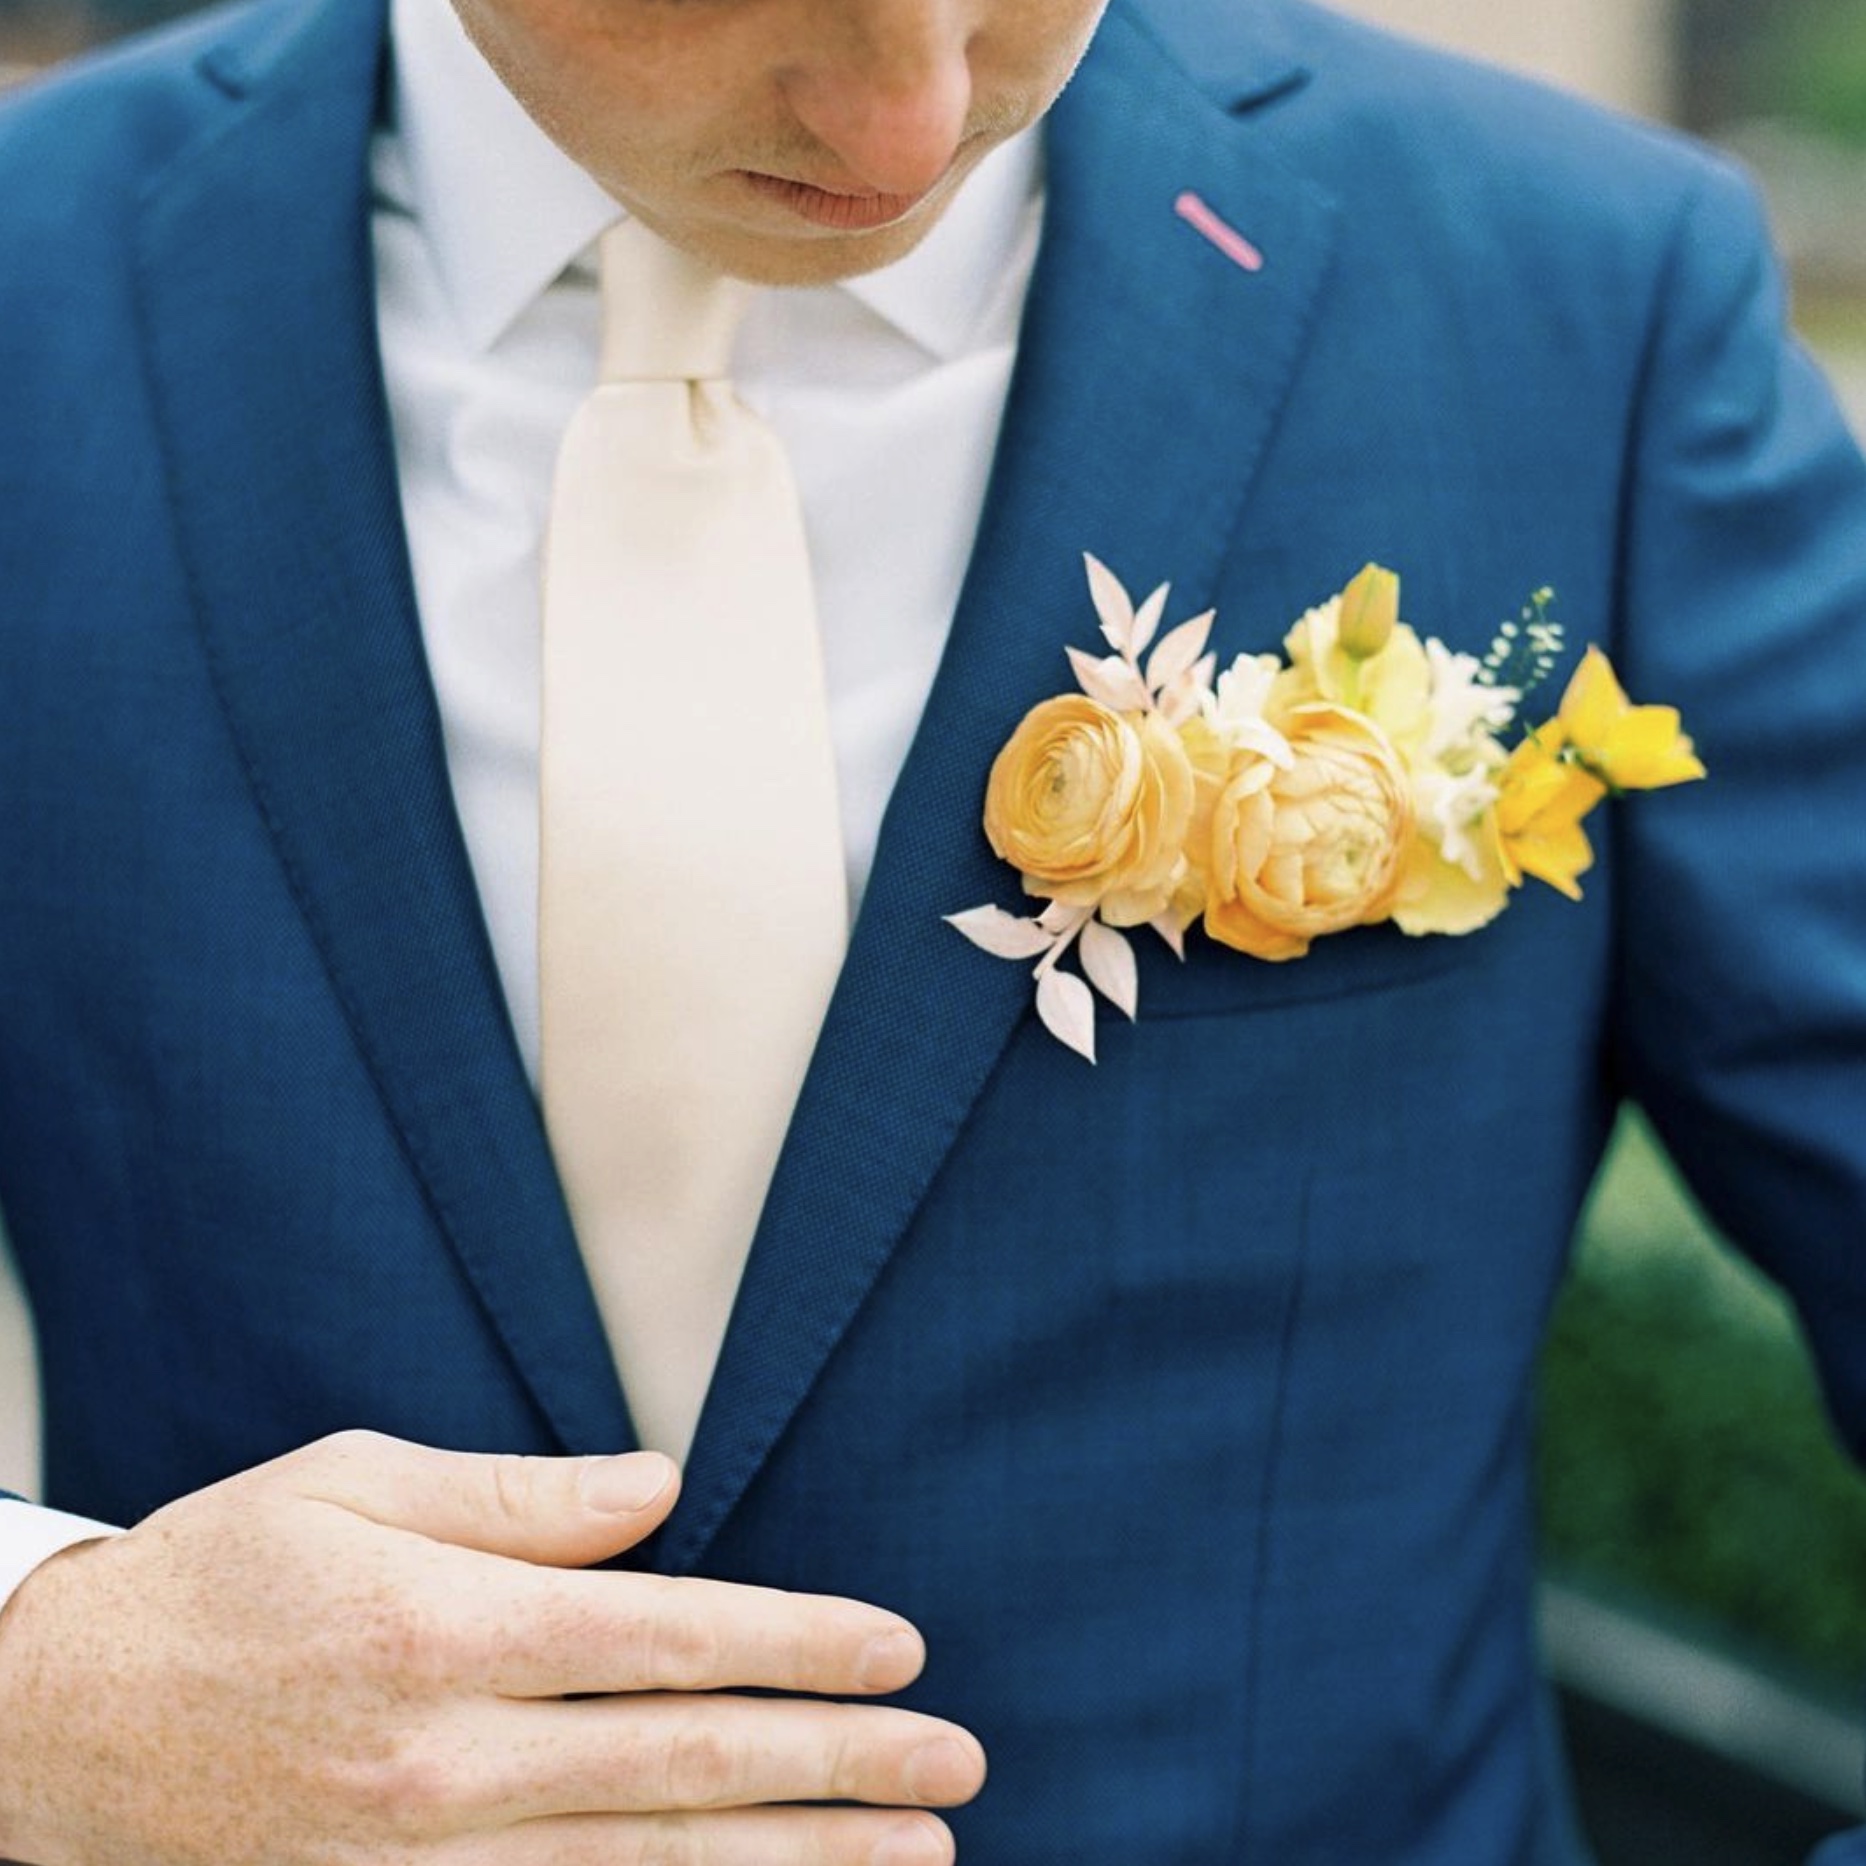 Everything You Need to Know About Wedding Pocket Squares